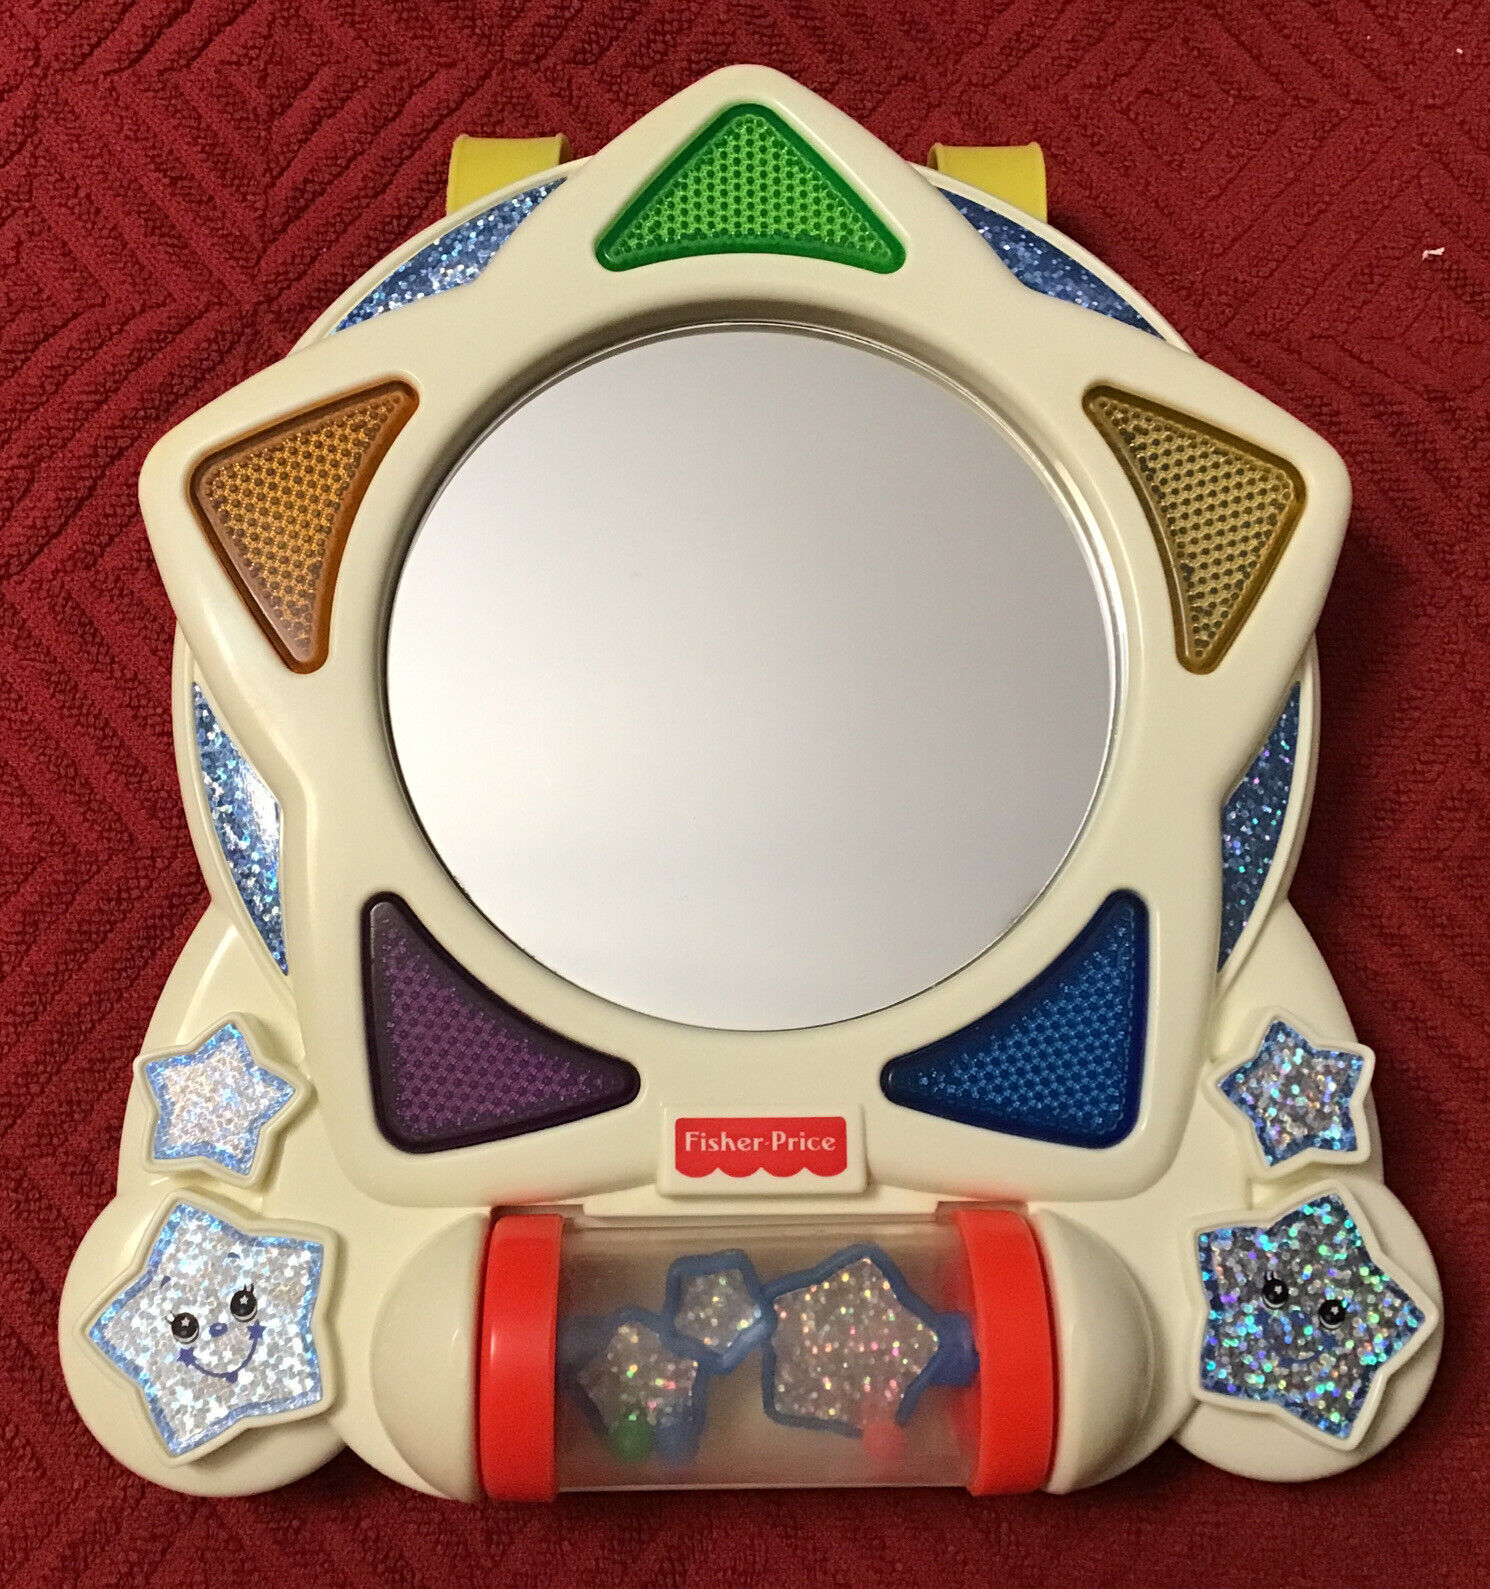 Fisher Price SPARKLING SYMPHONY Mirror - 71980, 2 Modes of Play, RARE 1999 - $44.55